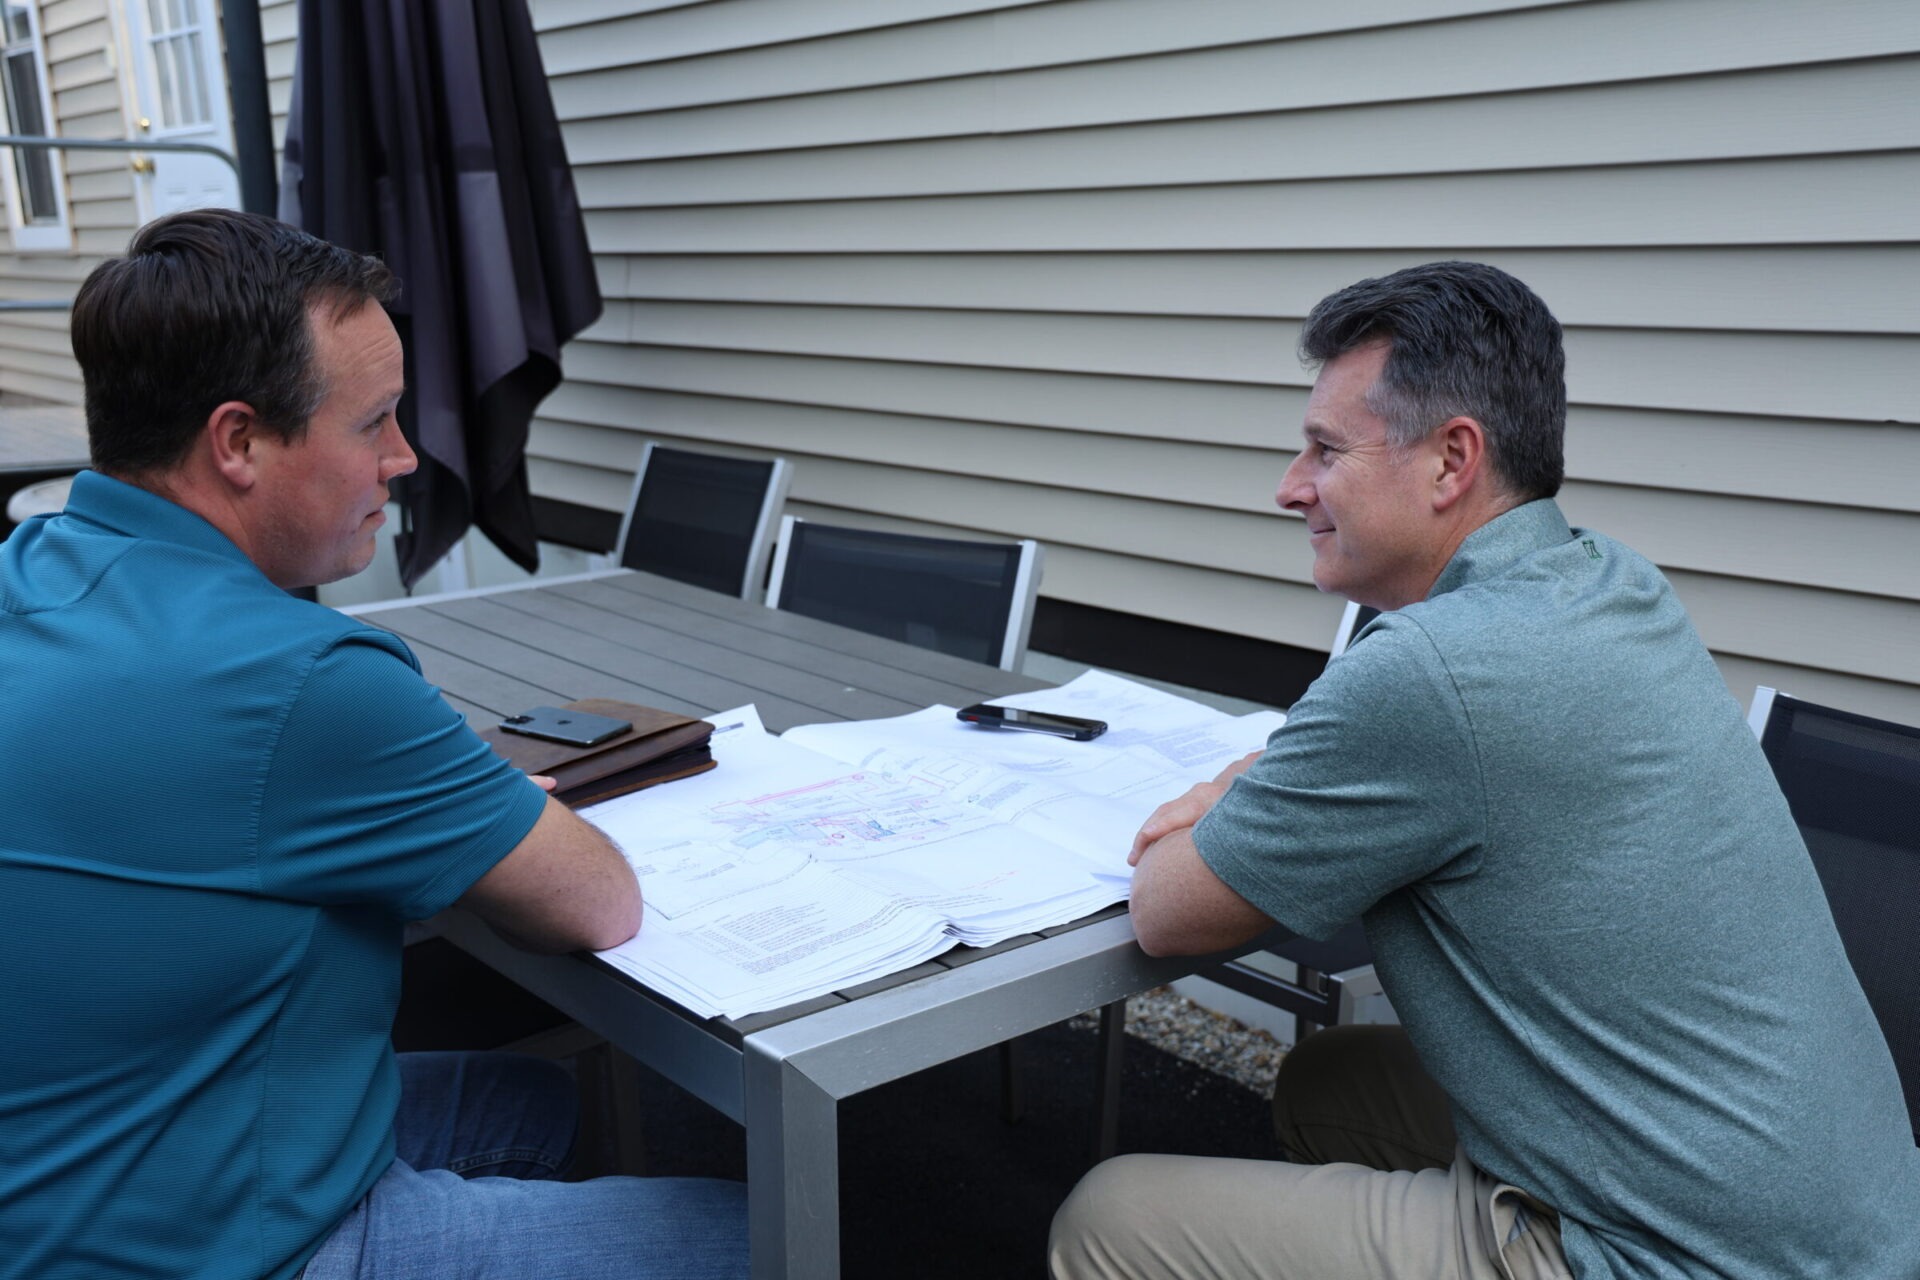 Two people sit at an outdoor table reviewing plans or documents, engaged in conversation, with a house facade and a patio umbrella in the background.